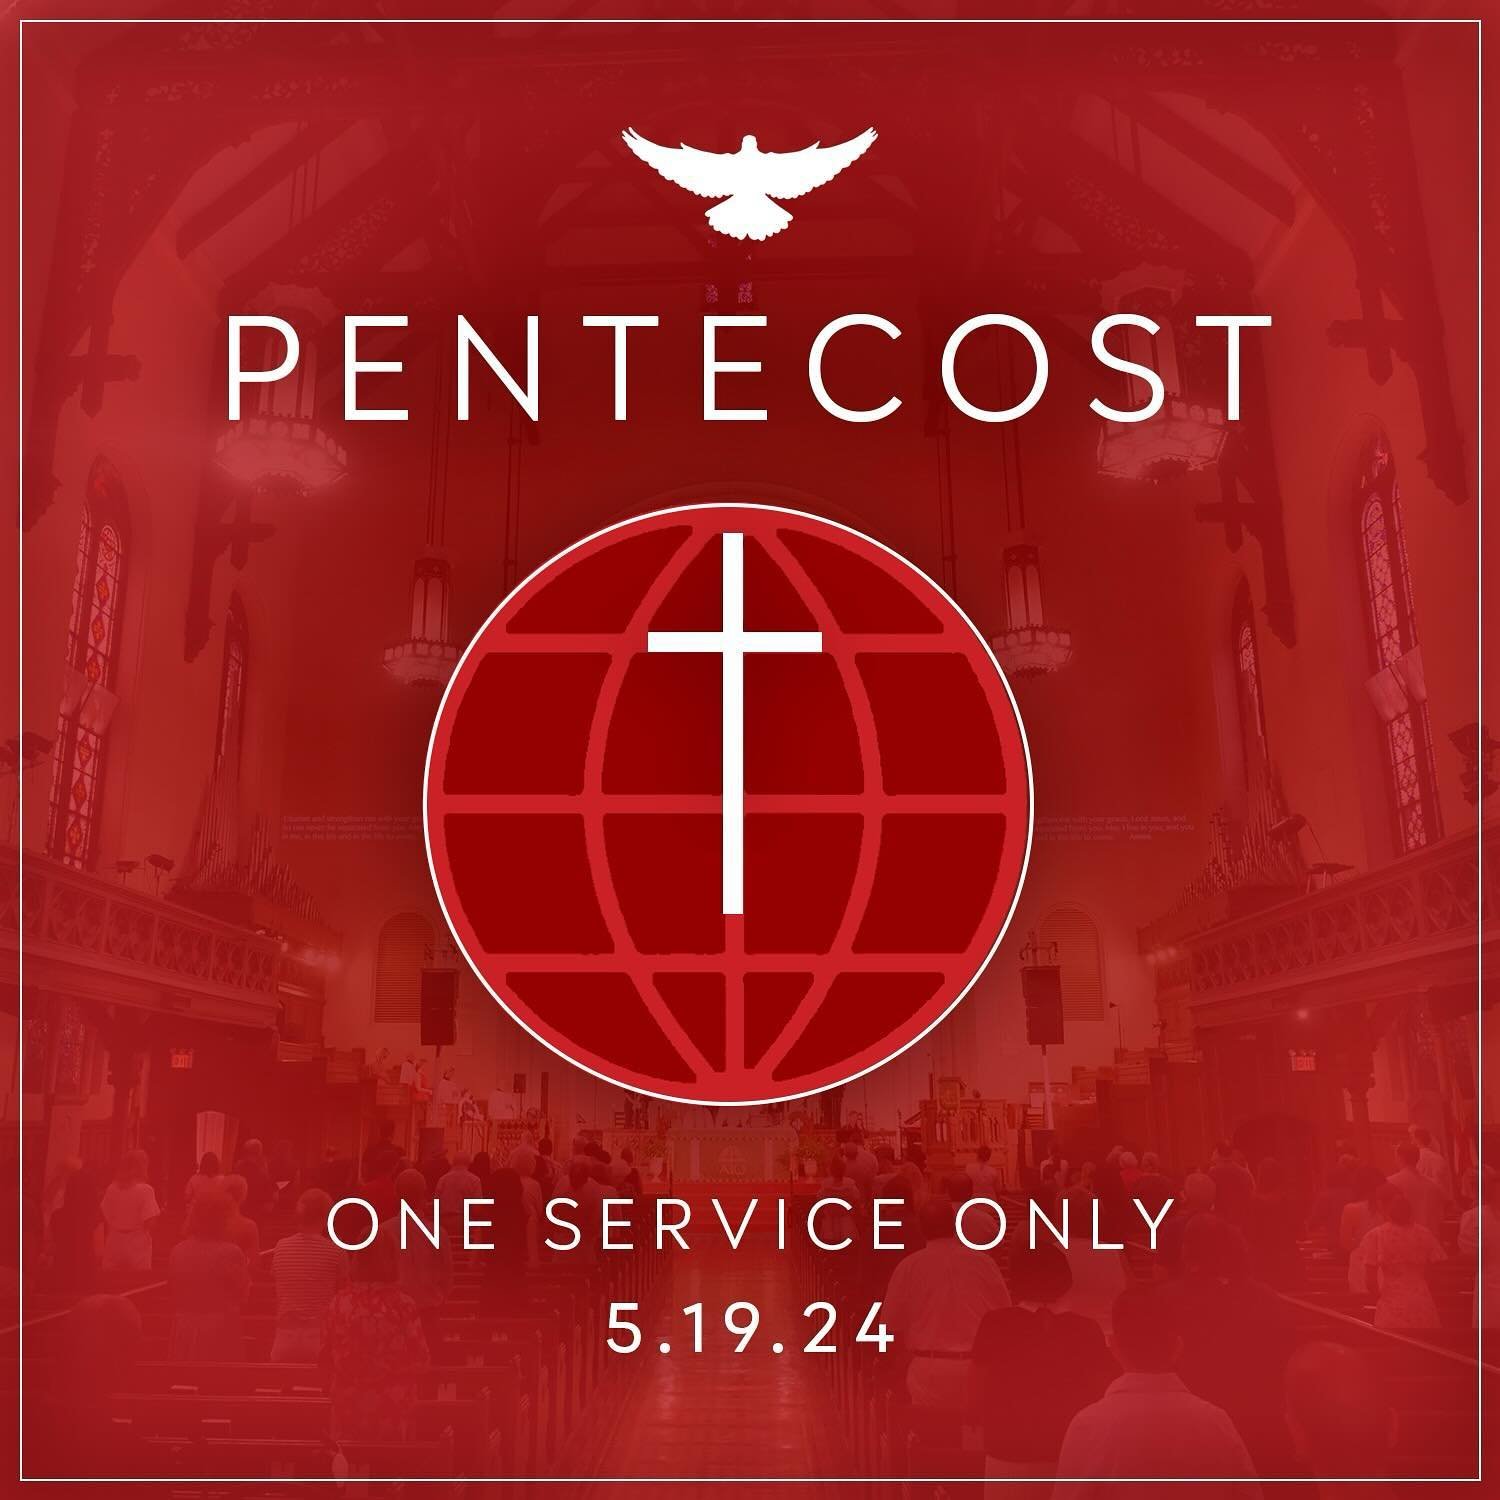 On Sunday May 19, please join us for a special 11am service at St. George&rsquo;s celebrating Pentecost and the tremendous progress of our ongoing capital campaign.  Following the service, we invite you to a catered reception to learn more about this